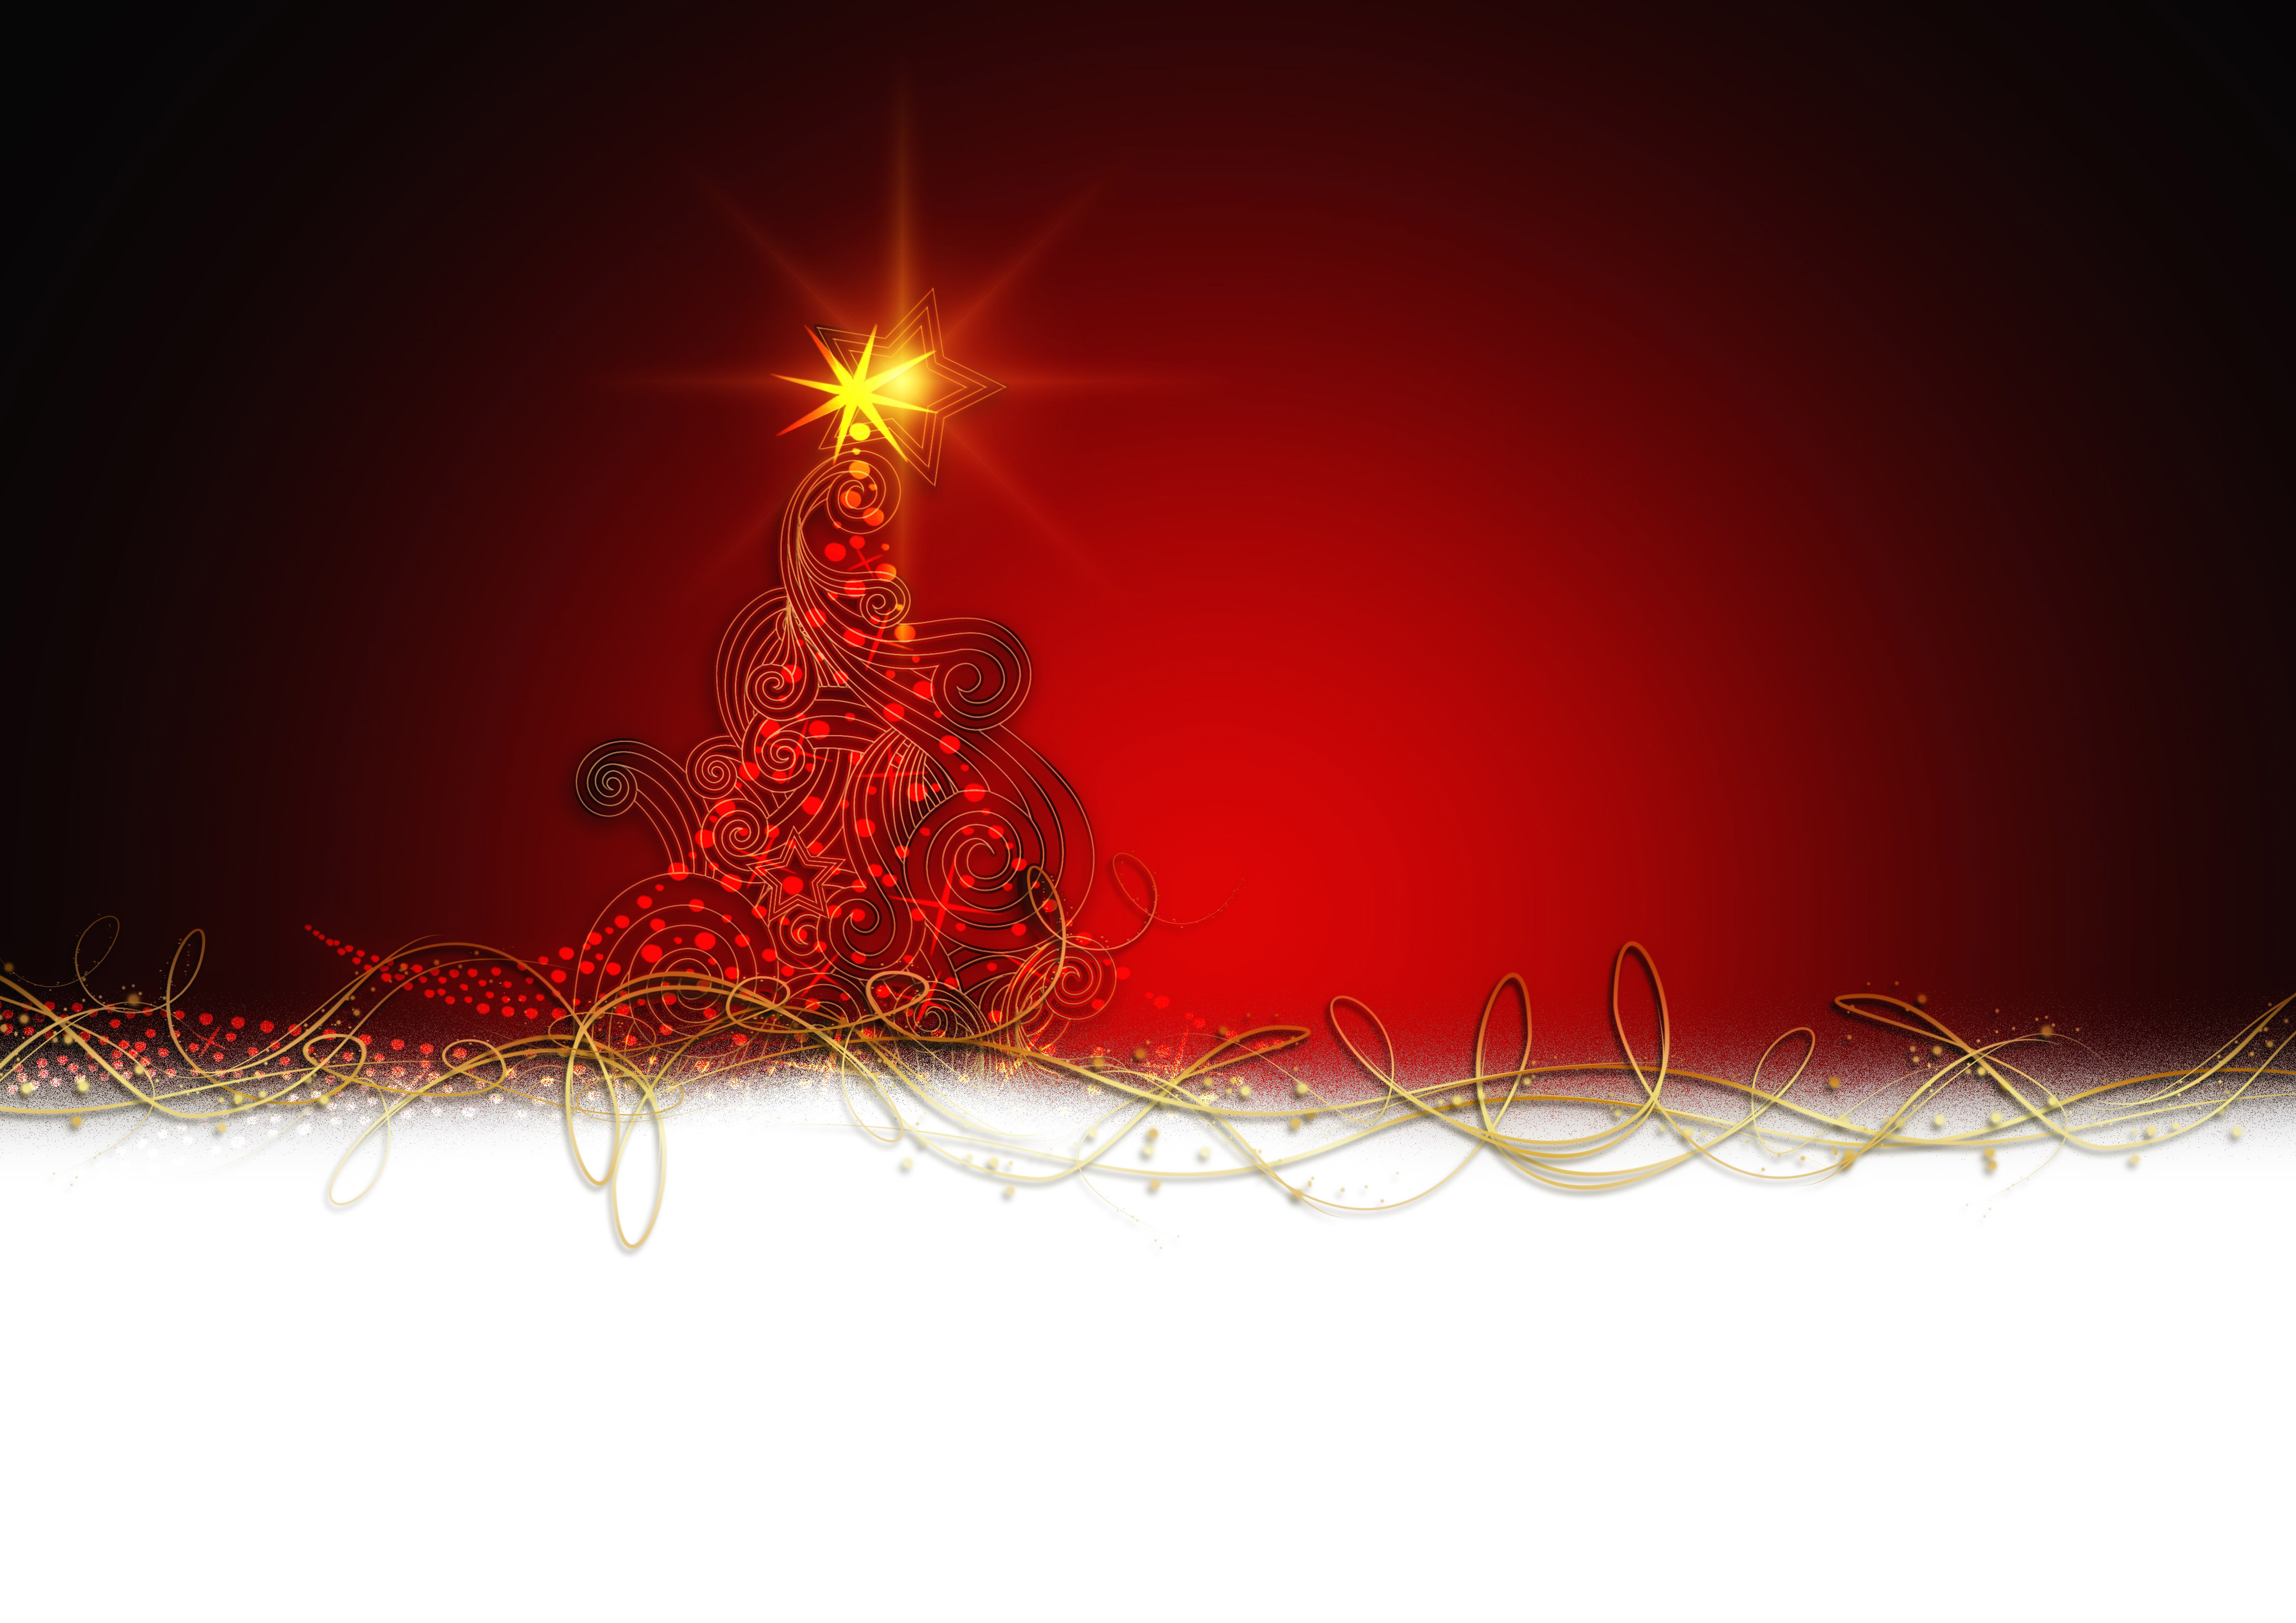 23 Christmas Tree Related Wallpapers, Background Images and Photos